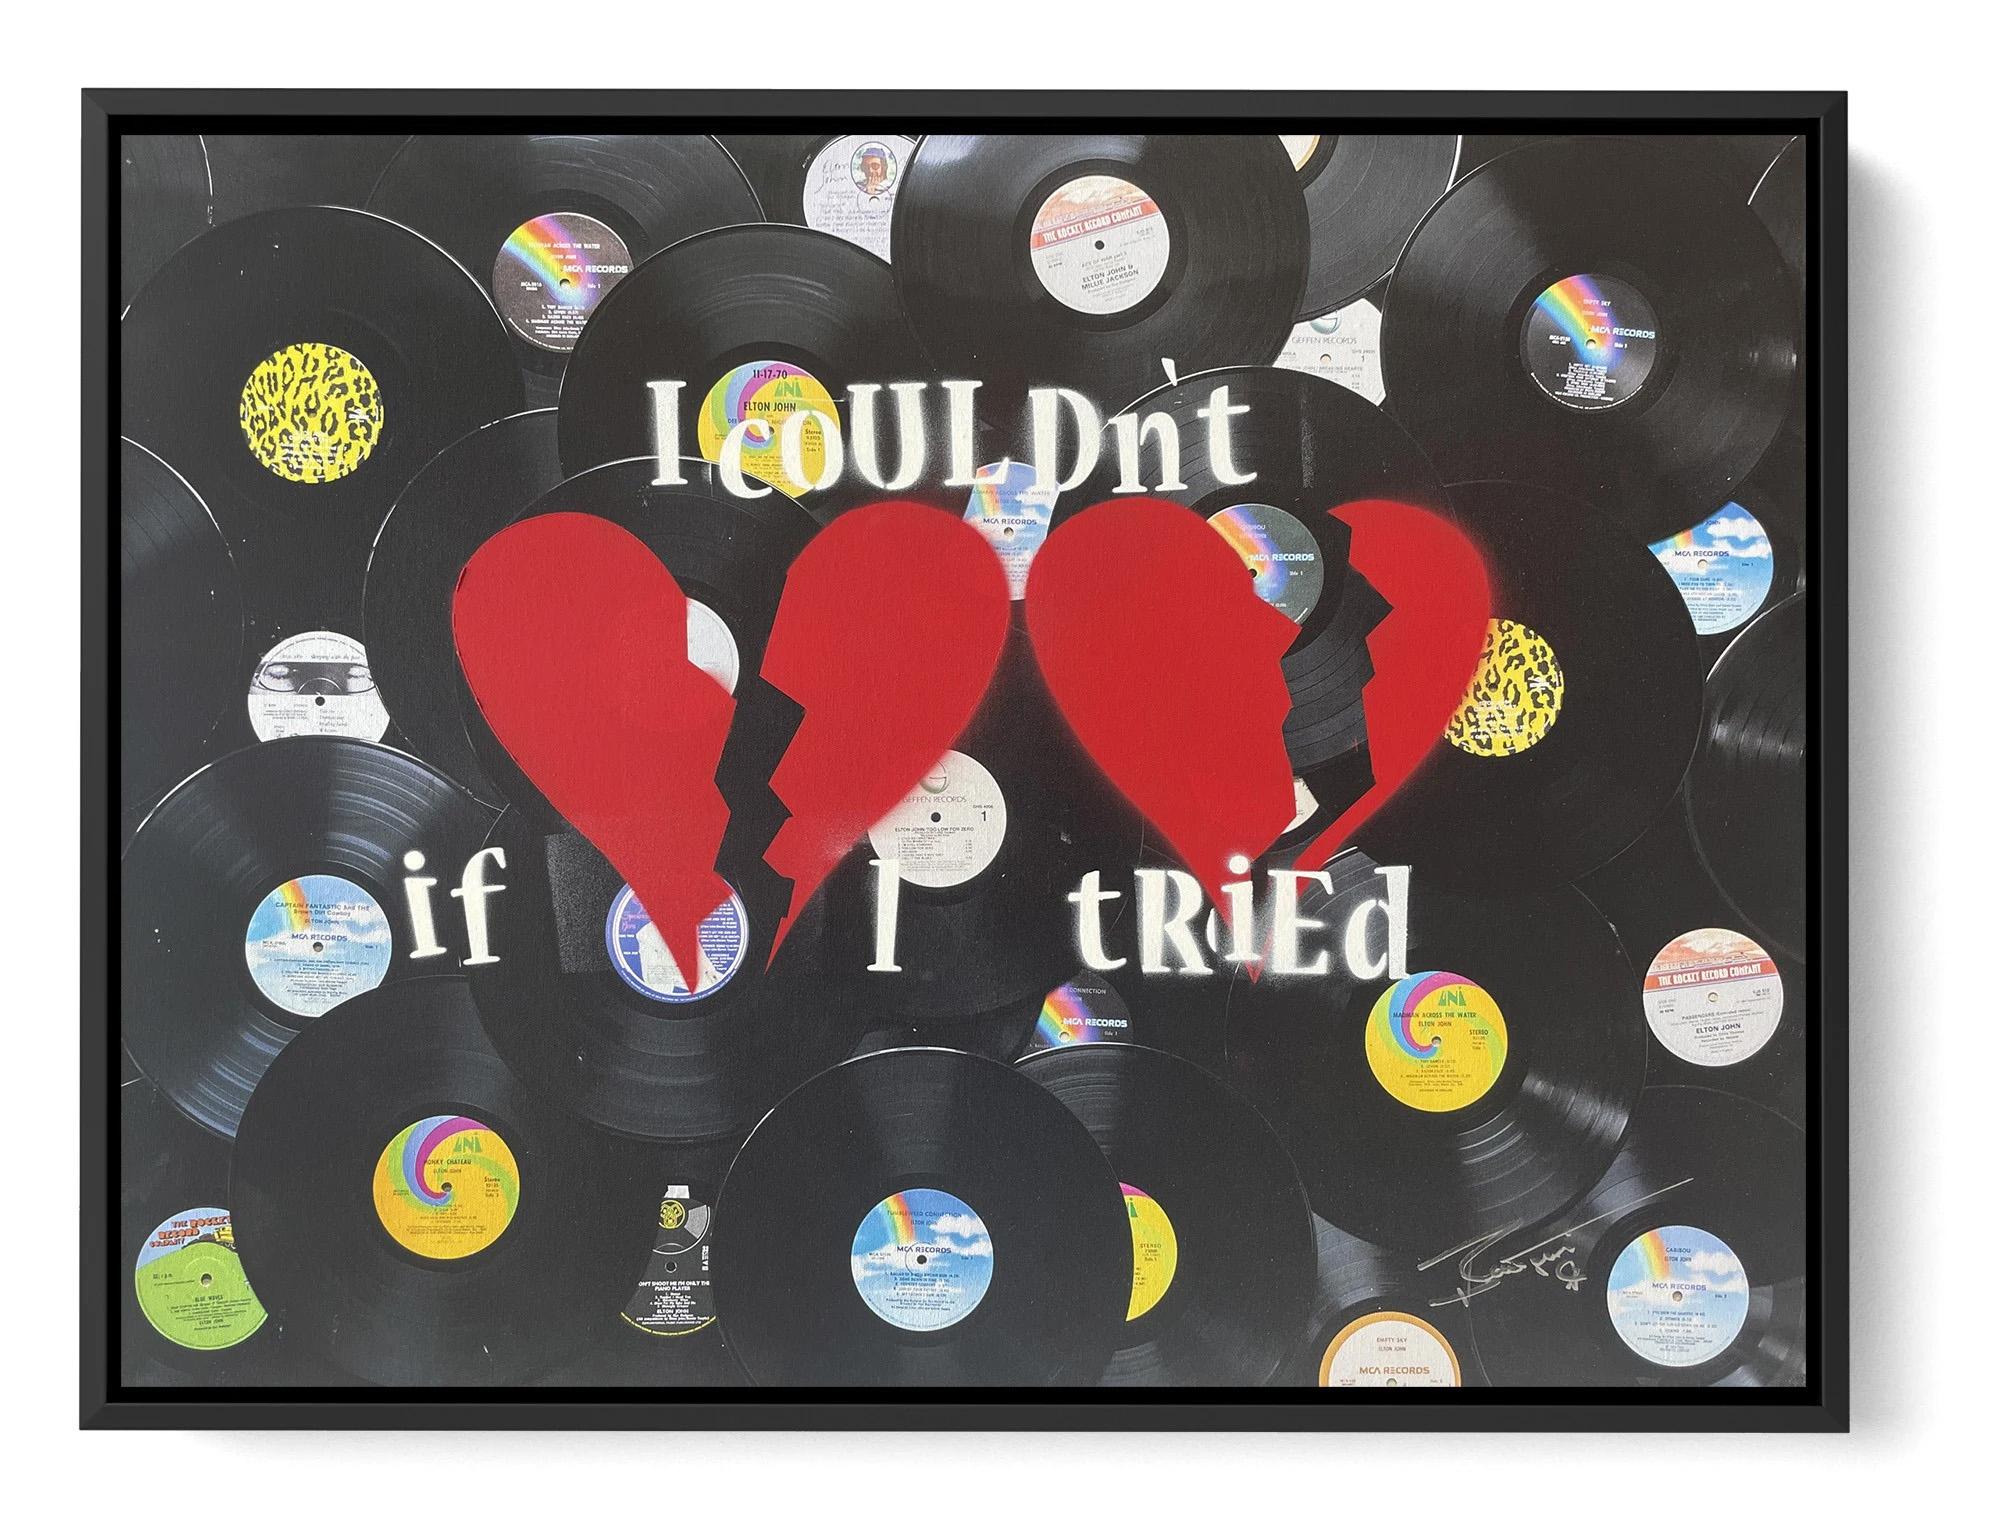 MEDIUM: Hand-embellished monotype on canvas
IMAGE SIZE: 25" x 33"
SKU: BT0016

Bernie Taupin's views art as a visual extension of his song lyrics. Inspired by "Don't Go Breaking My Heart,” released in 1976.